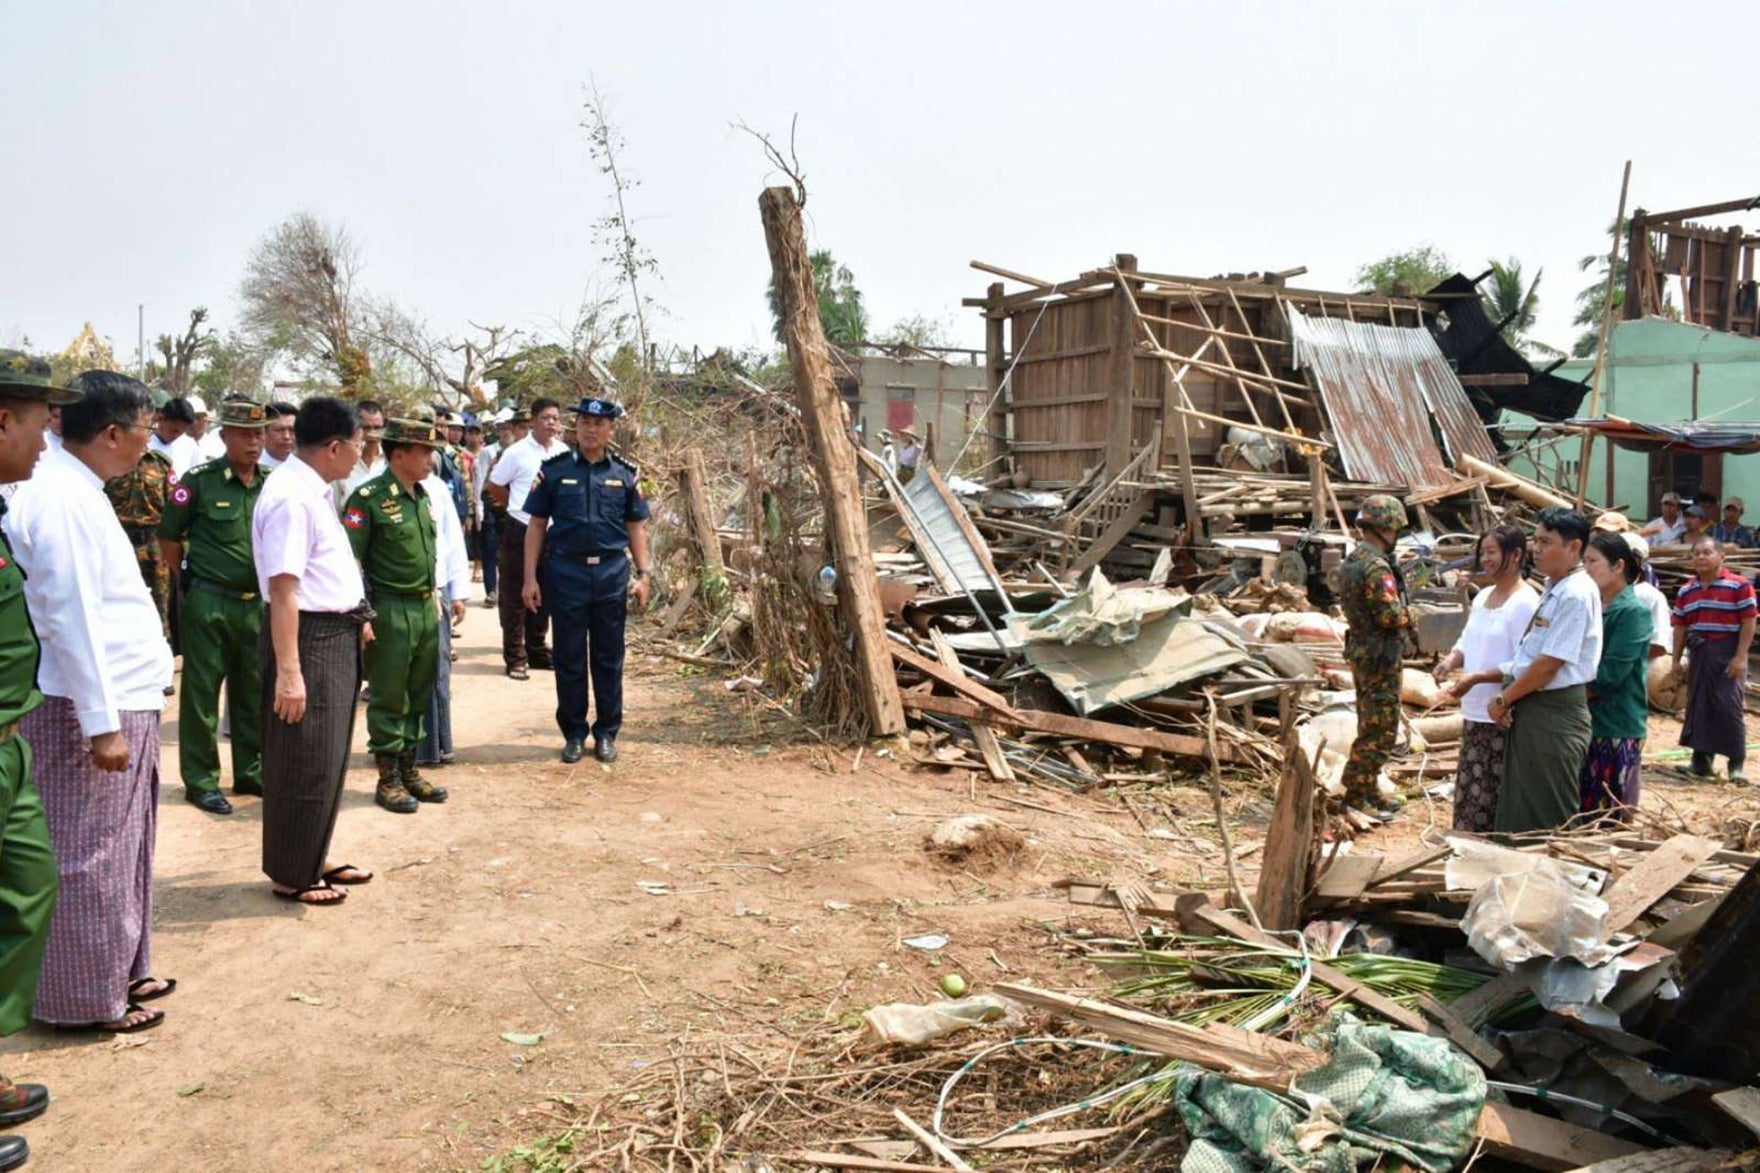 Tornado in Naypyitaw destroyed dozens of houses with hundreds in shelters